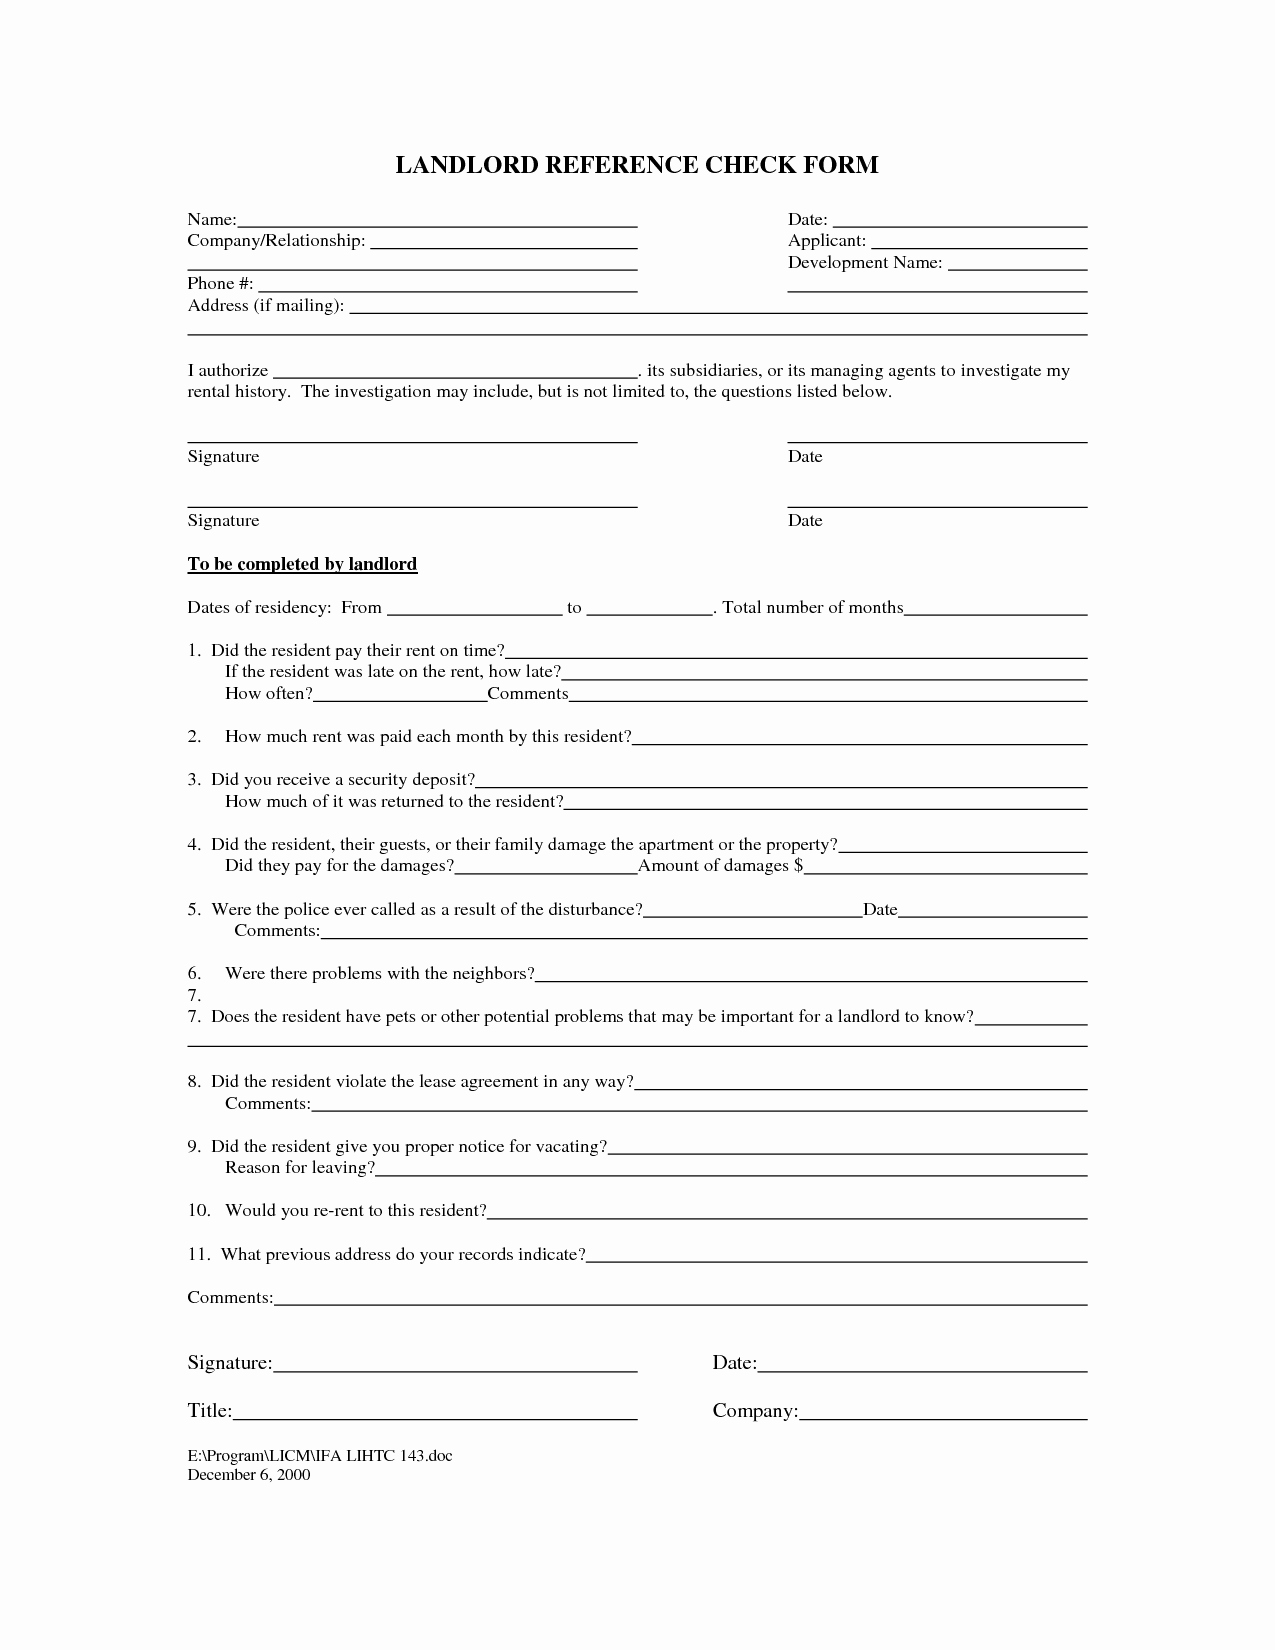 Landlord Verification form Template New Best S Of Landlord Verification form Free Rental